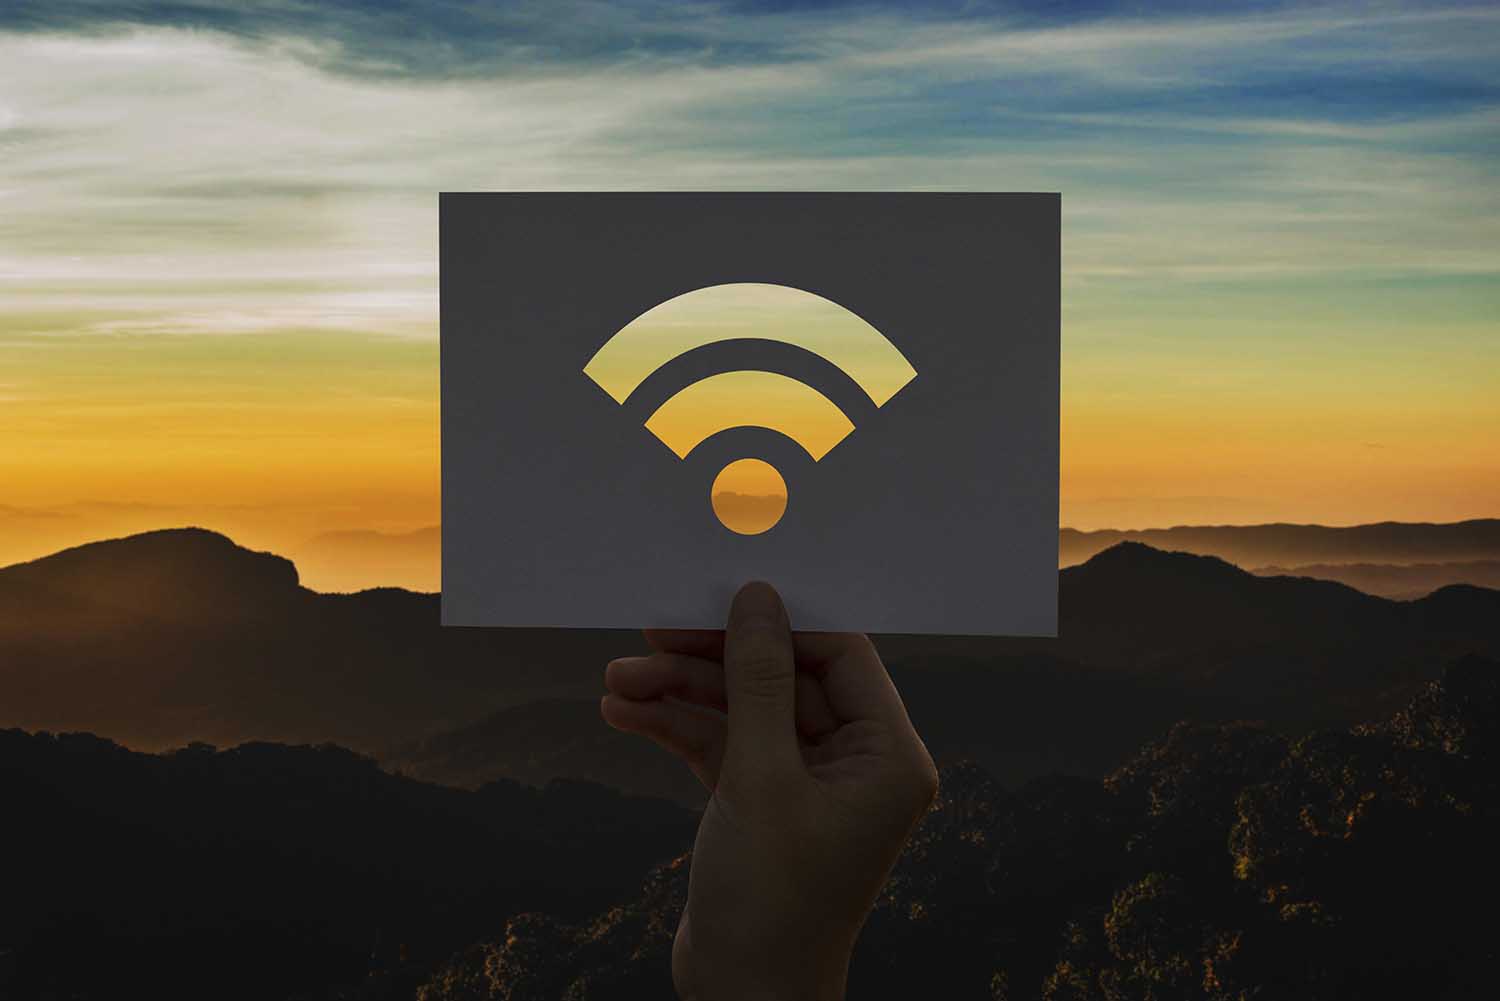 What are the features to look for when purchasing wireless internet and Wi-Fi for rural areas?